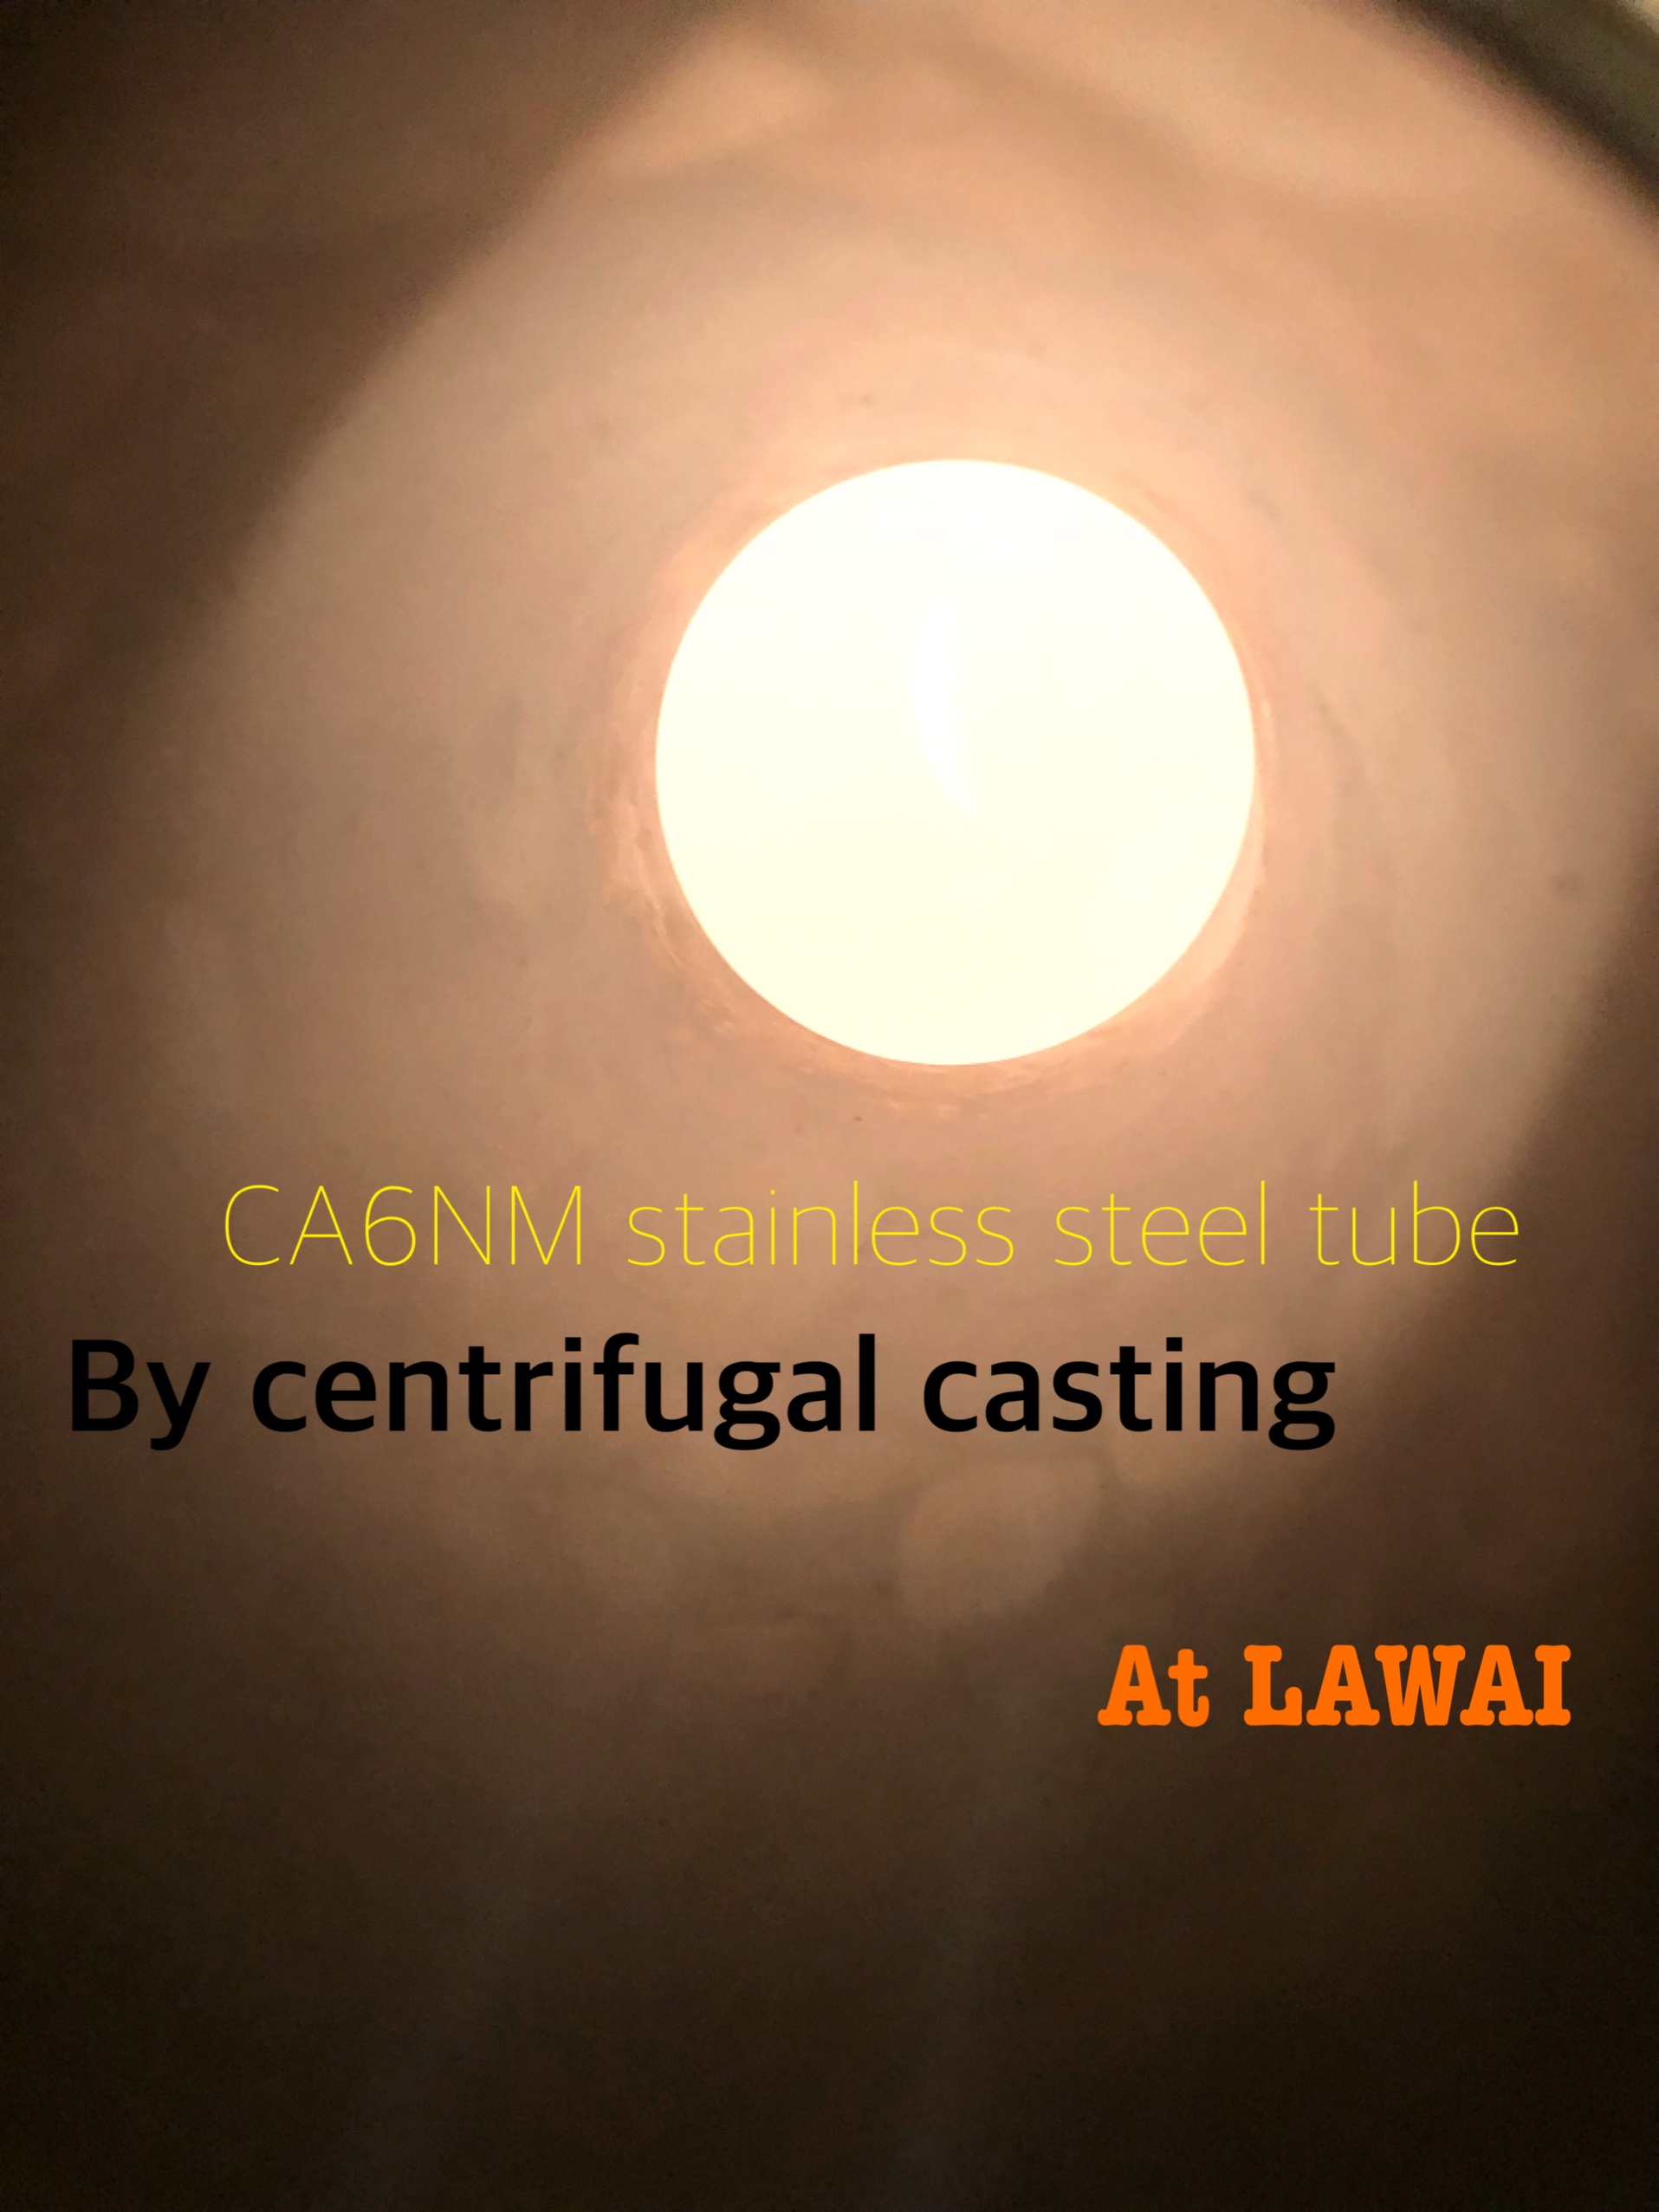 LAWAI INDUSTRIAL CORPORATION produces CA6NM stainless steel tube by centrifugal casting technique